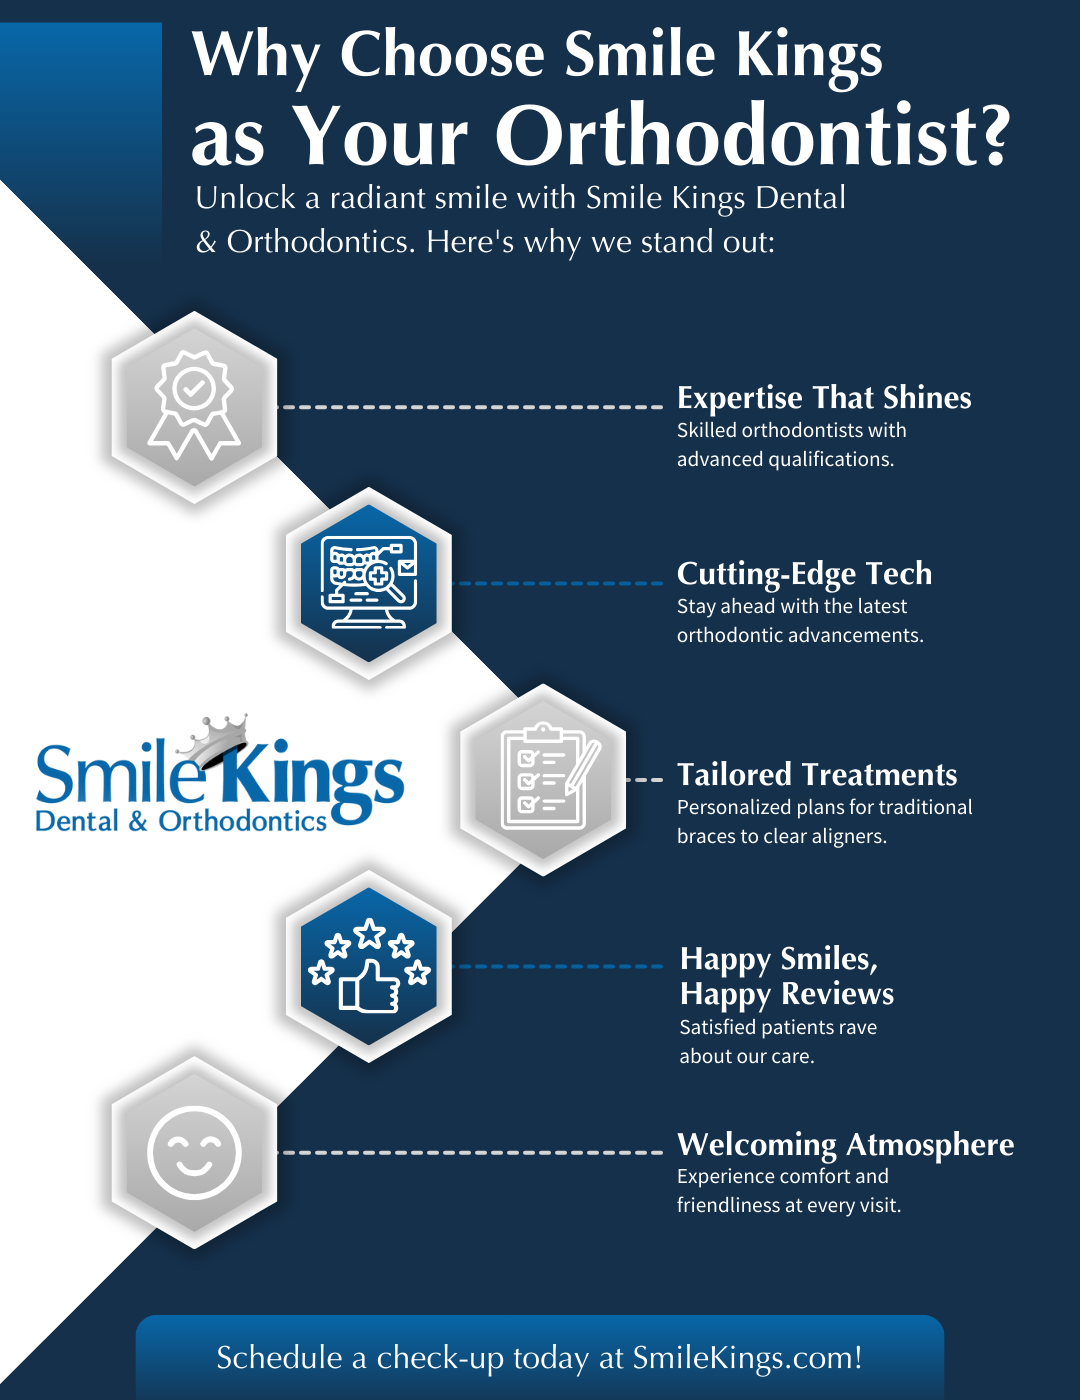 Why Choose Smile Kings as Your Orthodontist?